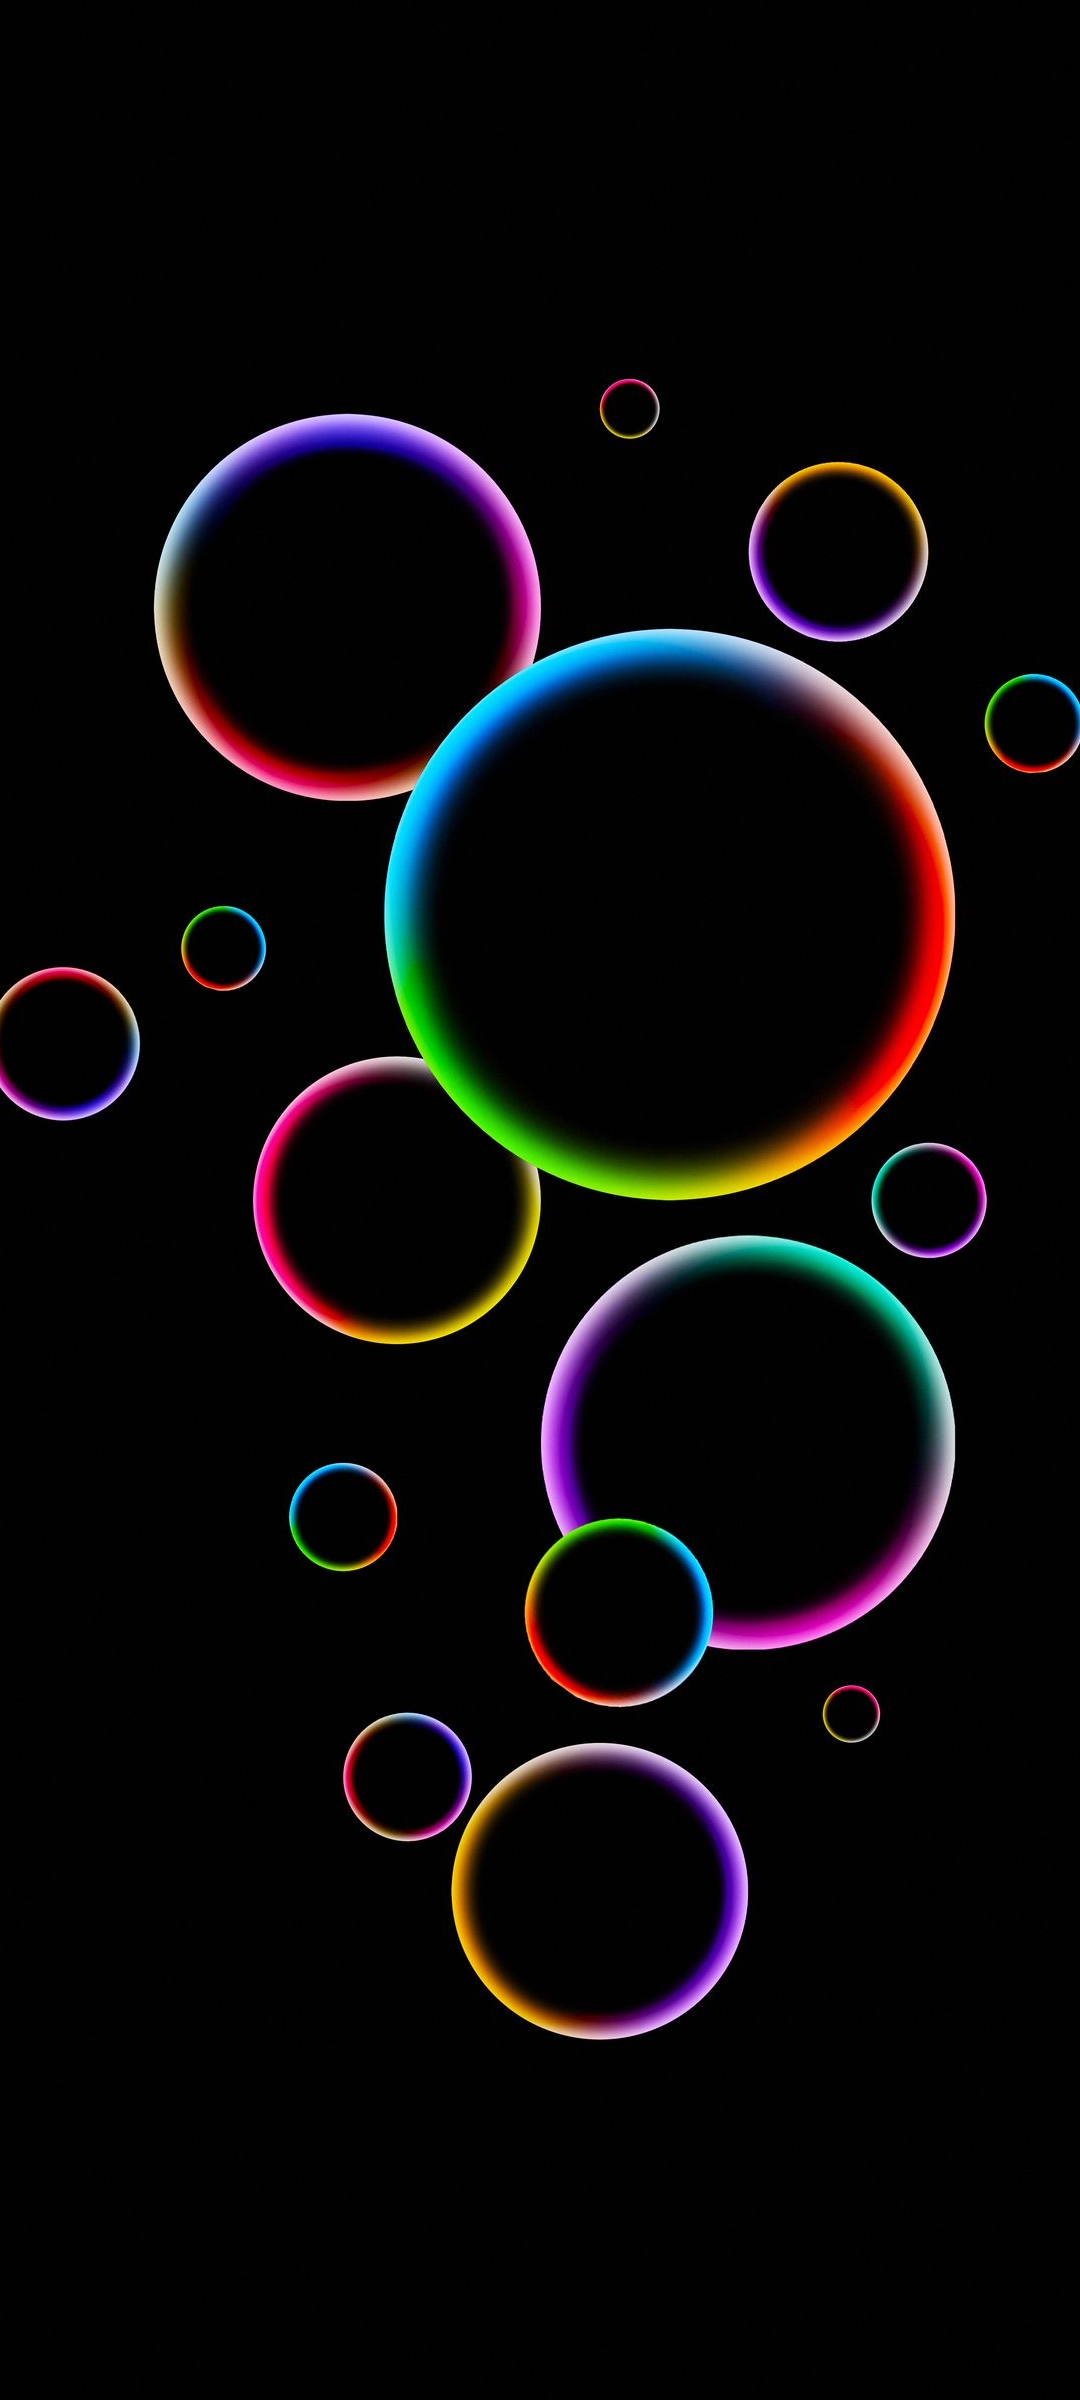 1000 Bubbles Background Pictures  Download Free Images on Unsplash